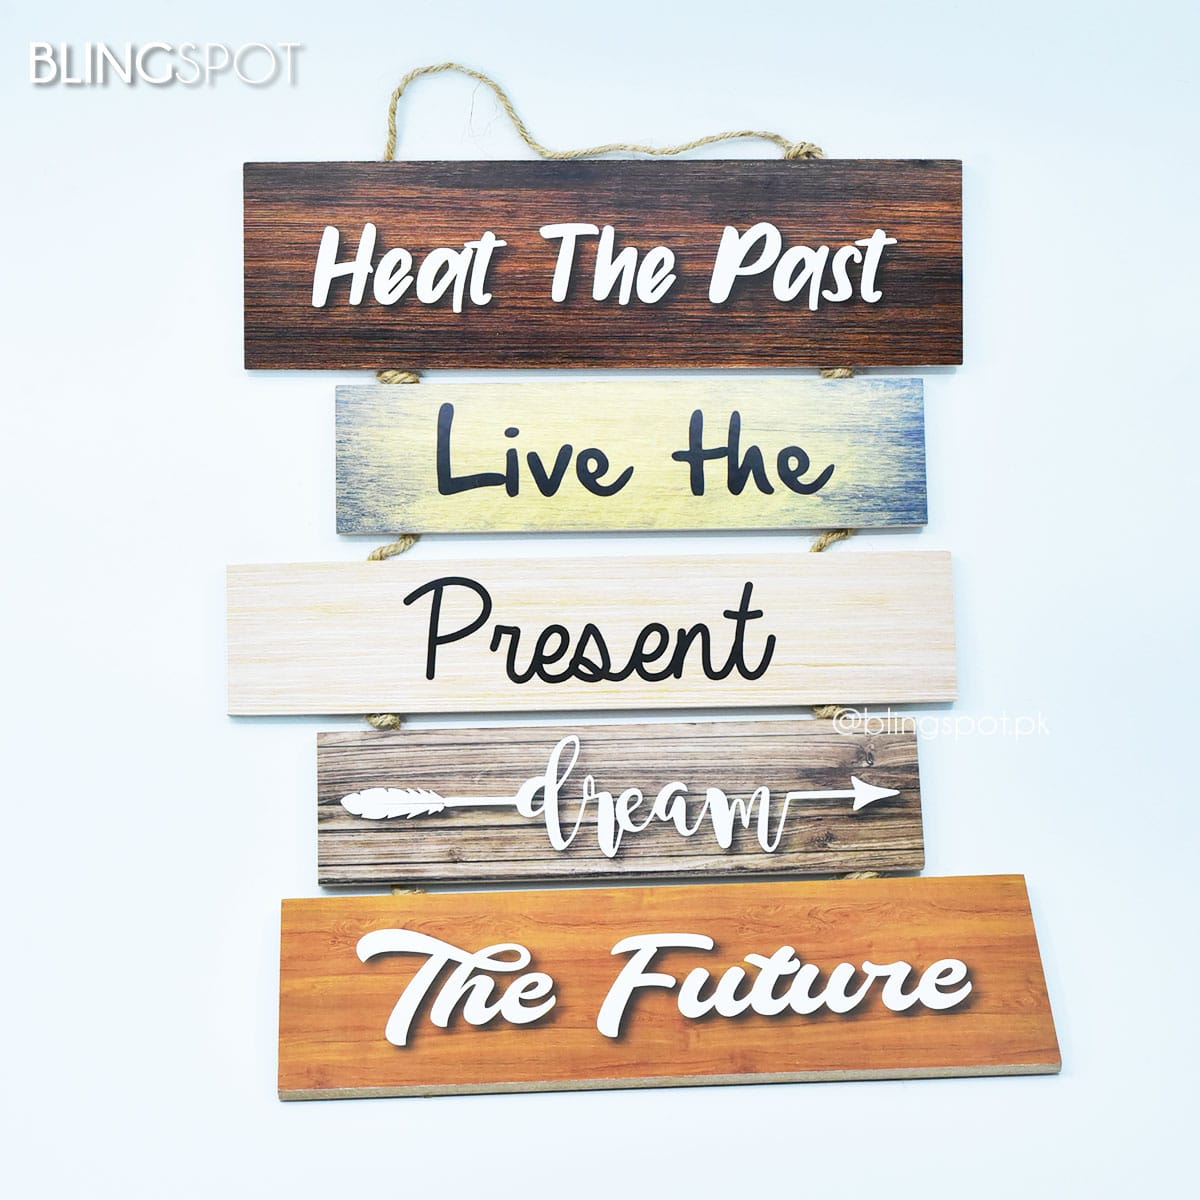 Heat The Past Live The Present  - Wall Hanging